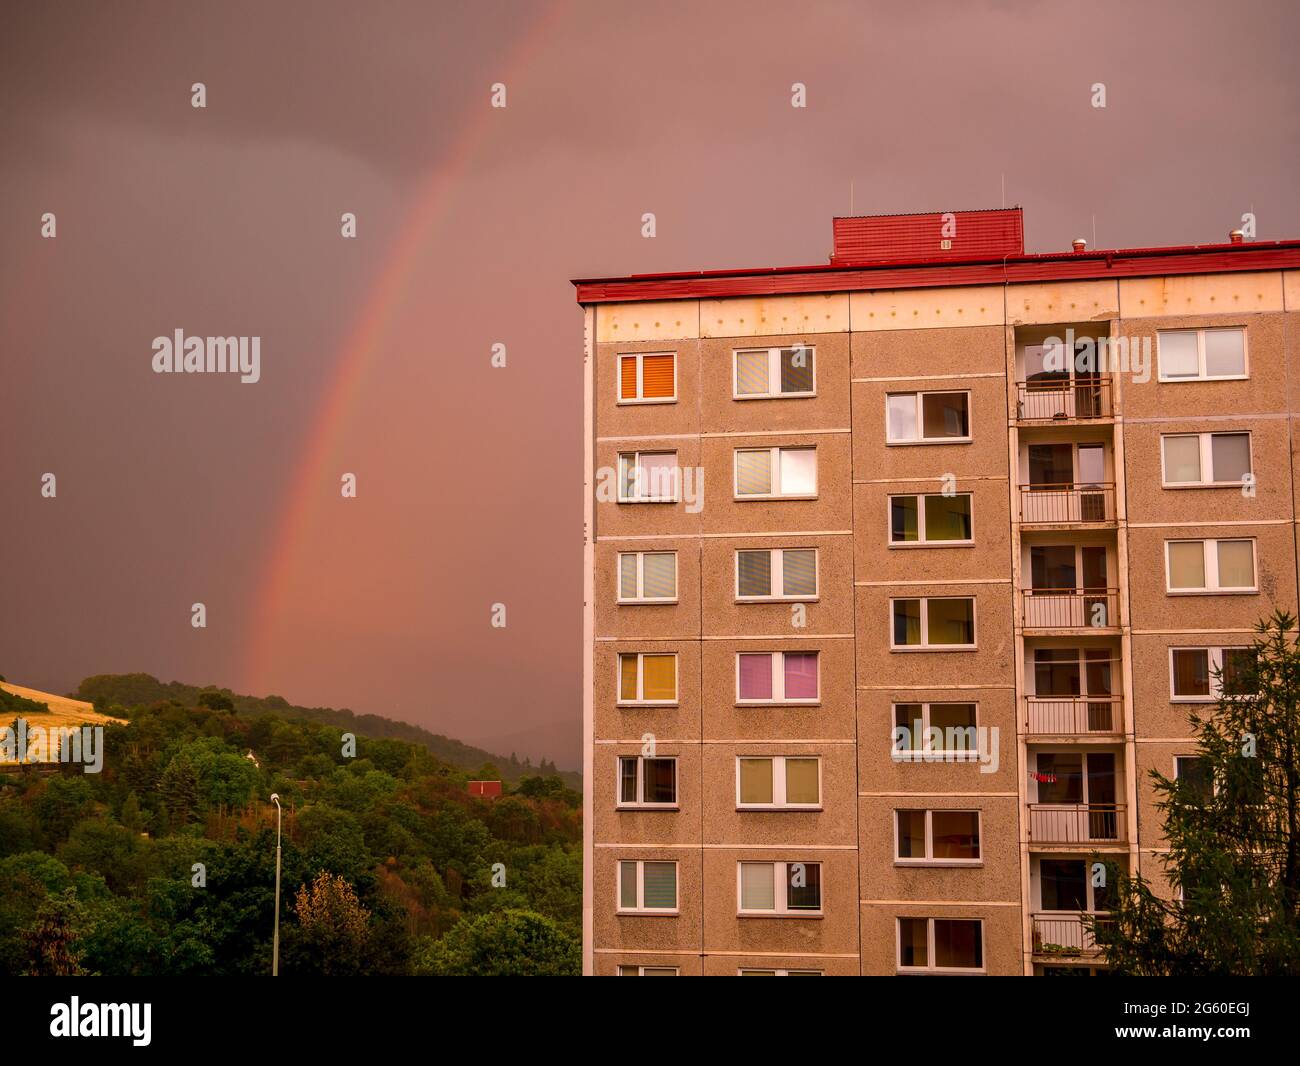 Rainbow over the house with dense rain clouds in the background Stock Photo